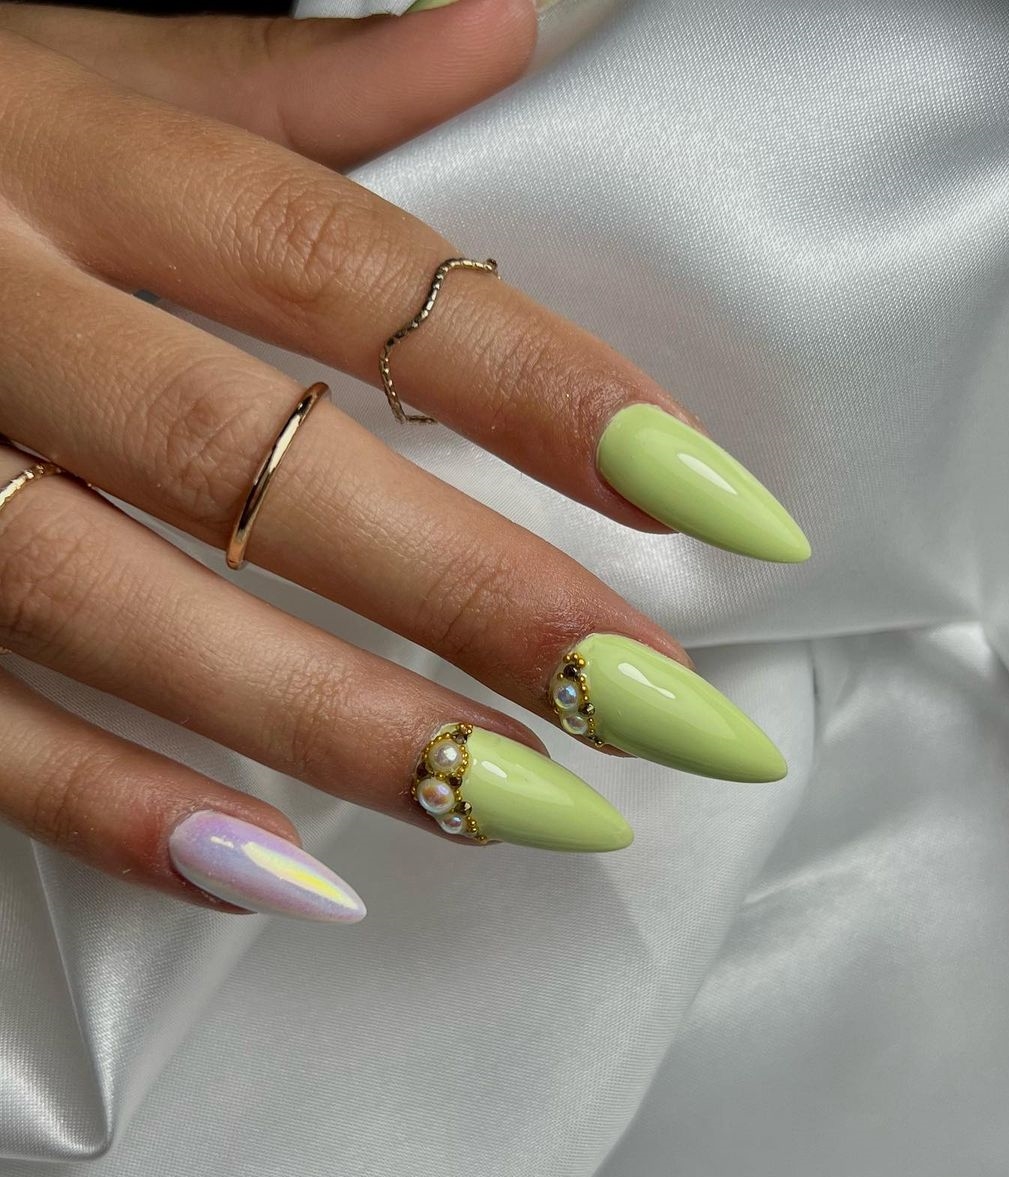 50+ Fearless Stiletto Nails to Go Outside Your Box - Hairstylery